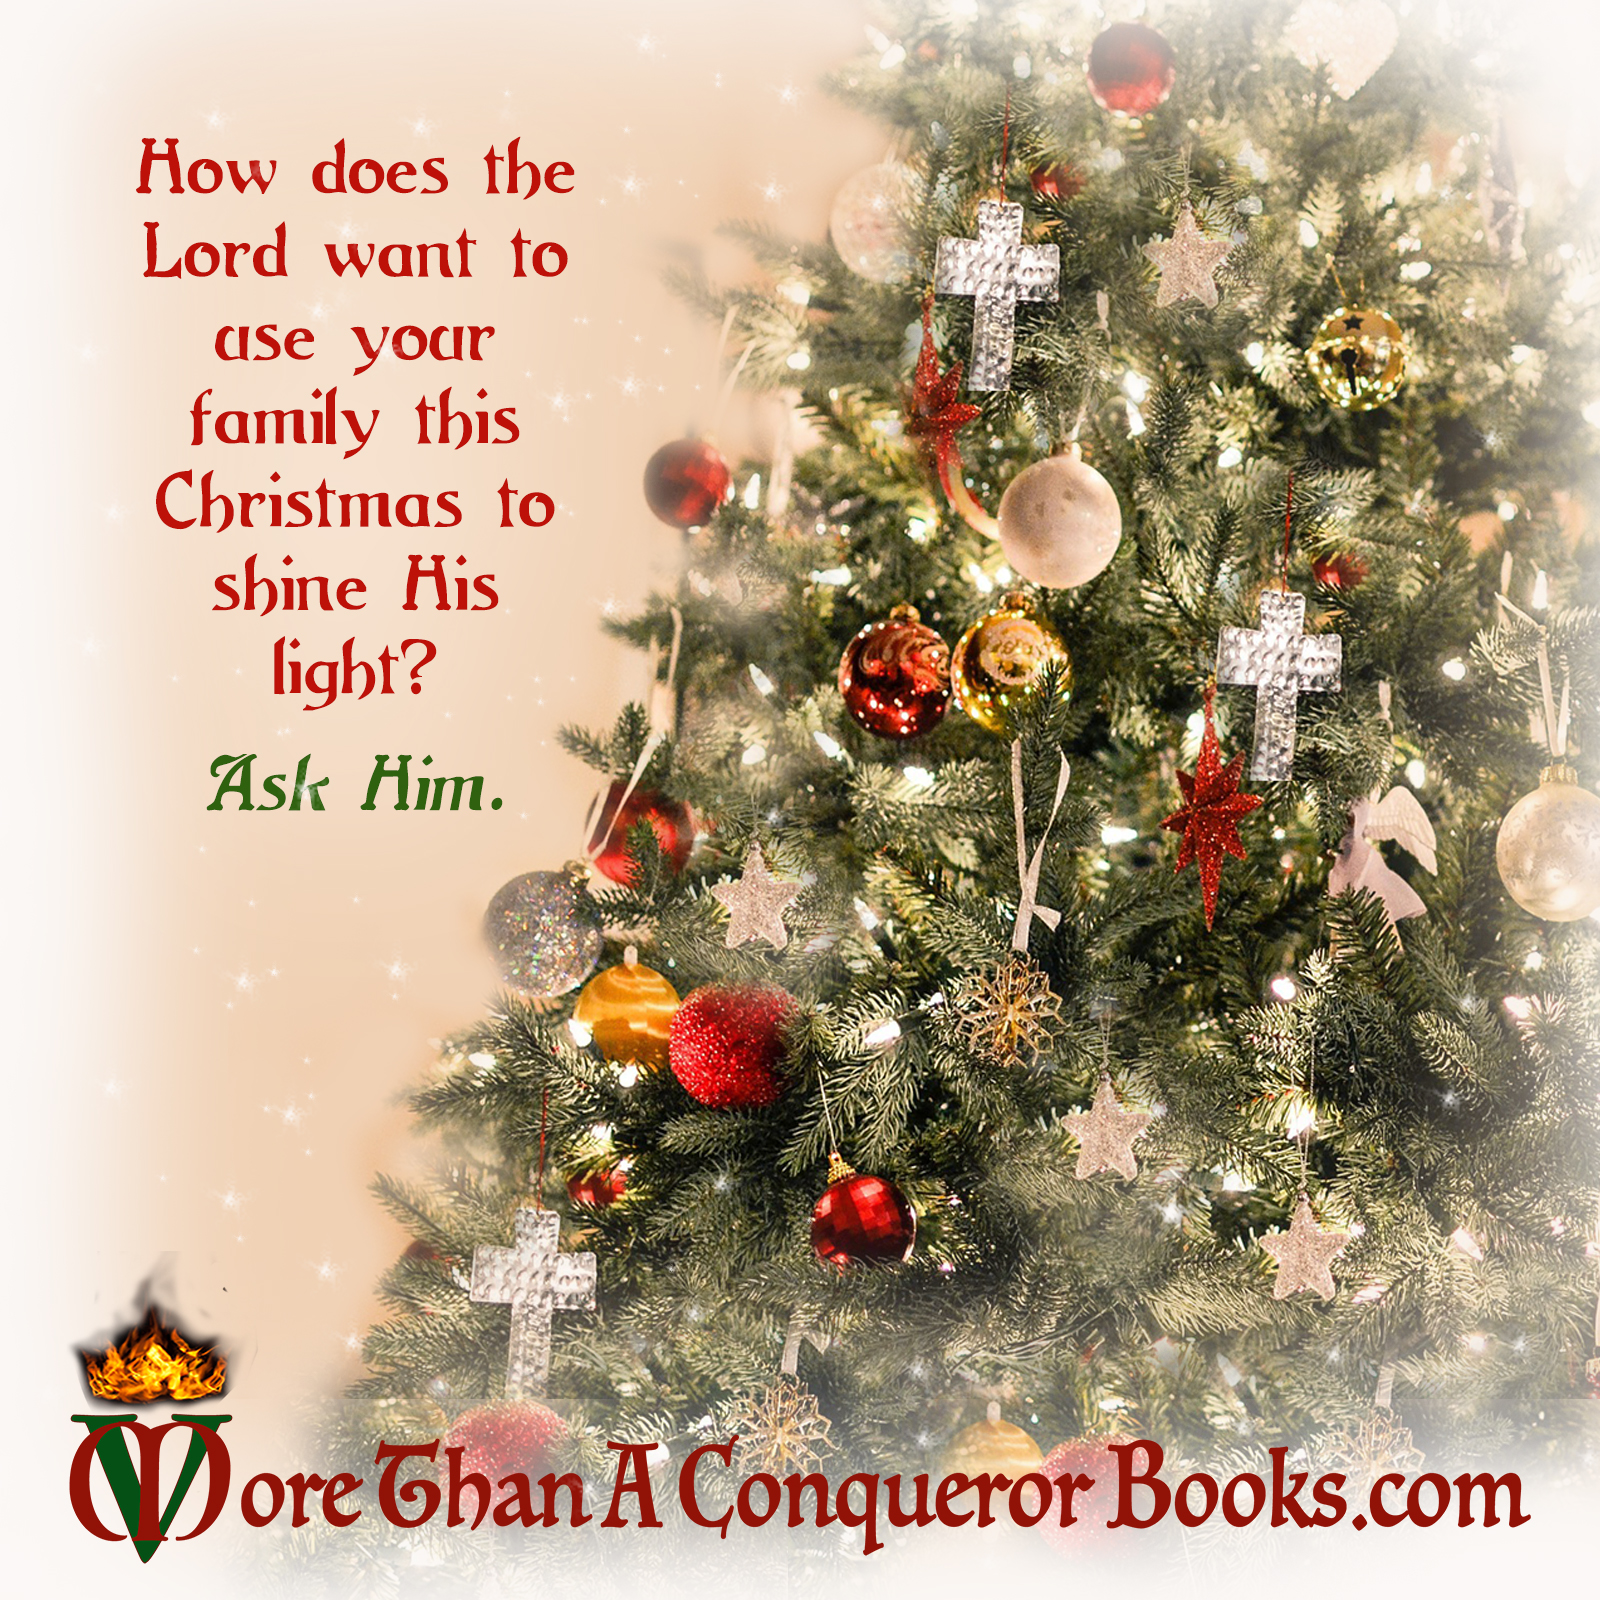 Christmas-How does God want to use your family to shine His light-Mikaela Vincent-MoreThanAConquerorBooks.jpg